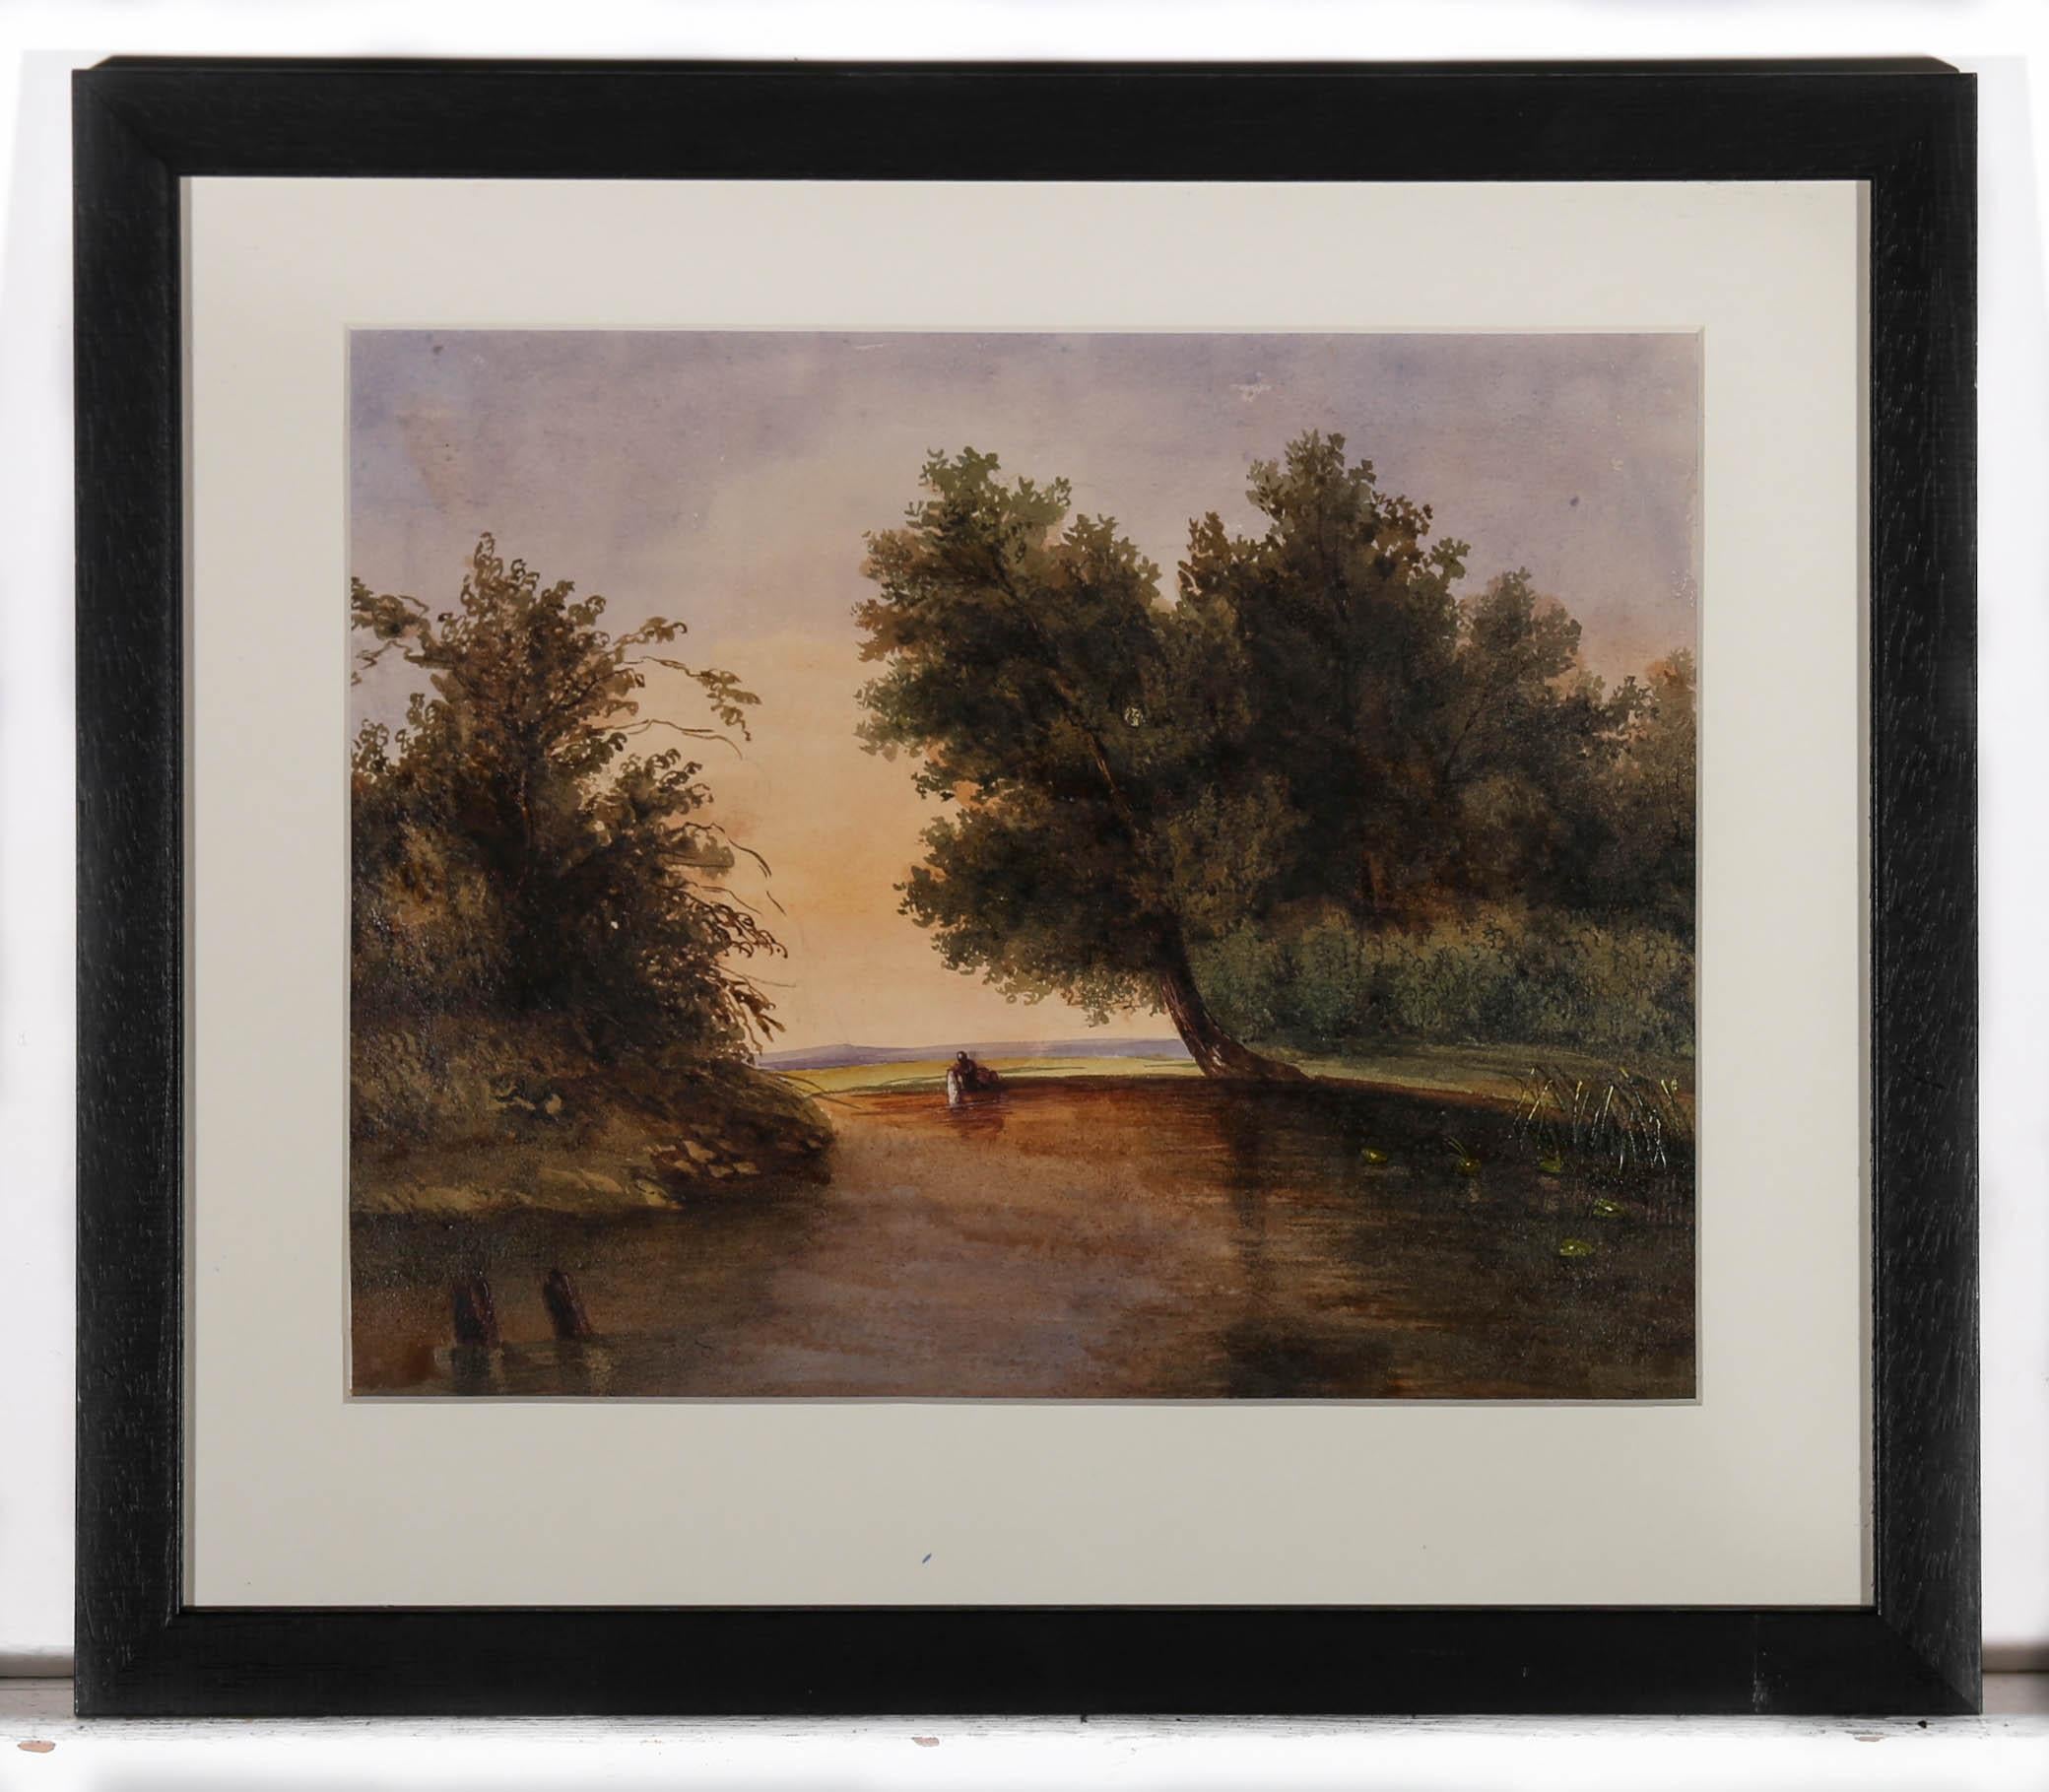 Wash day! This charming scene from the 19th century period, depicts a figure washing clothes at the side of a quiet lake. The watercolour has been immaculately presented in a new card mount and contemporary black frame. Unsigned. On paper.
